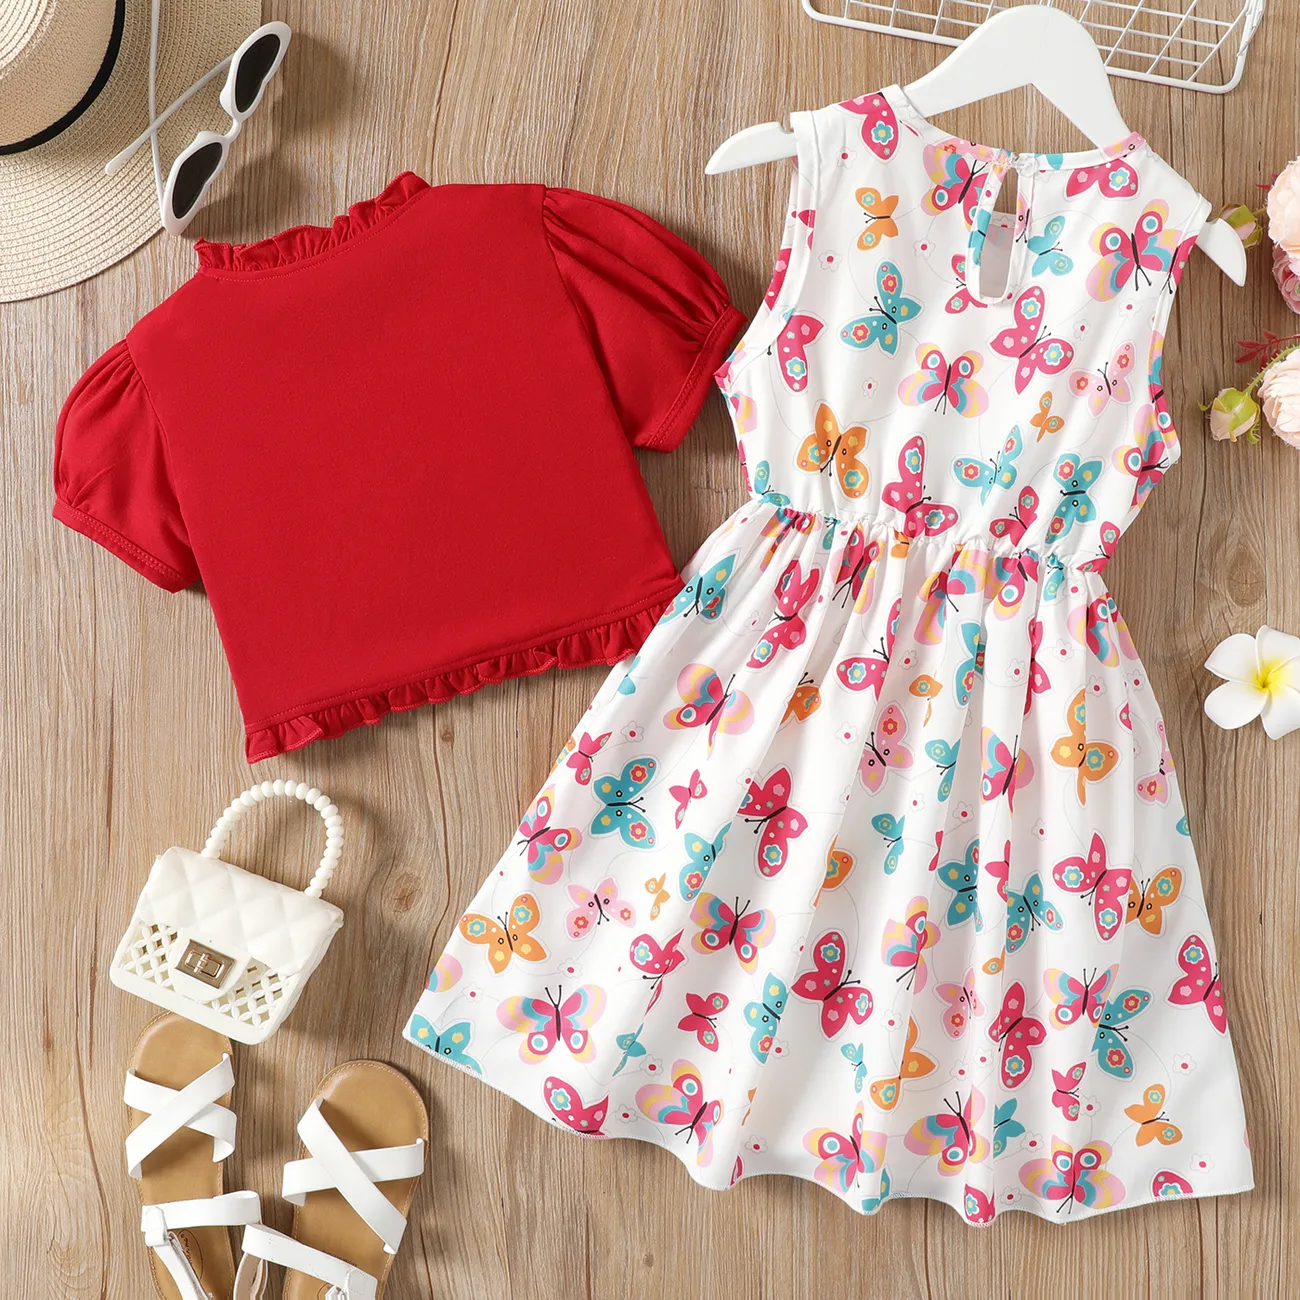 2Pcs Kid Girl Ruffled Short-sleeve Cardigan and Butterfly/Floral Print Tank Dress Set Red big image 1